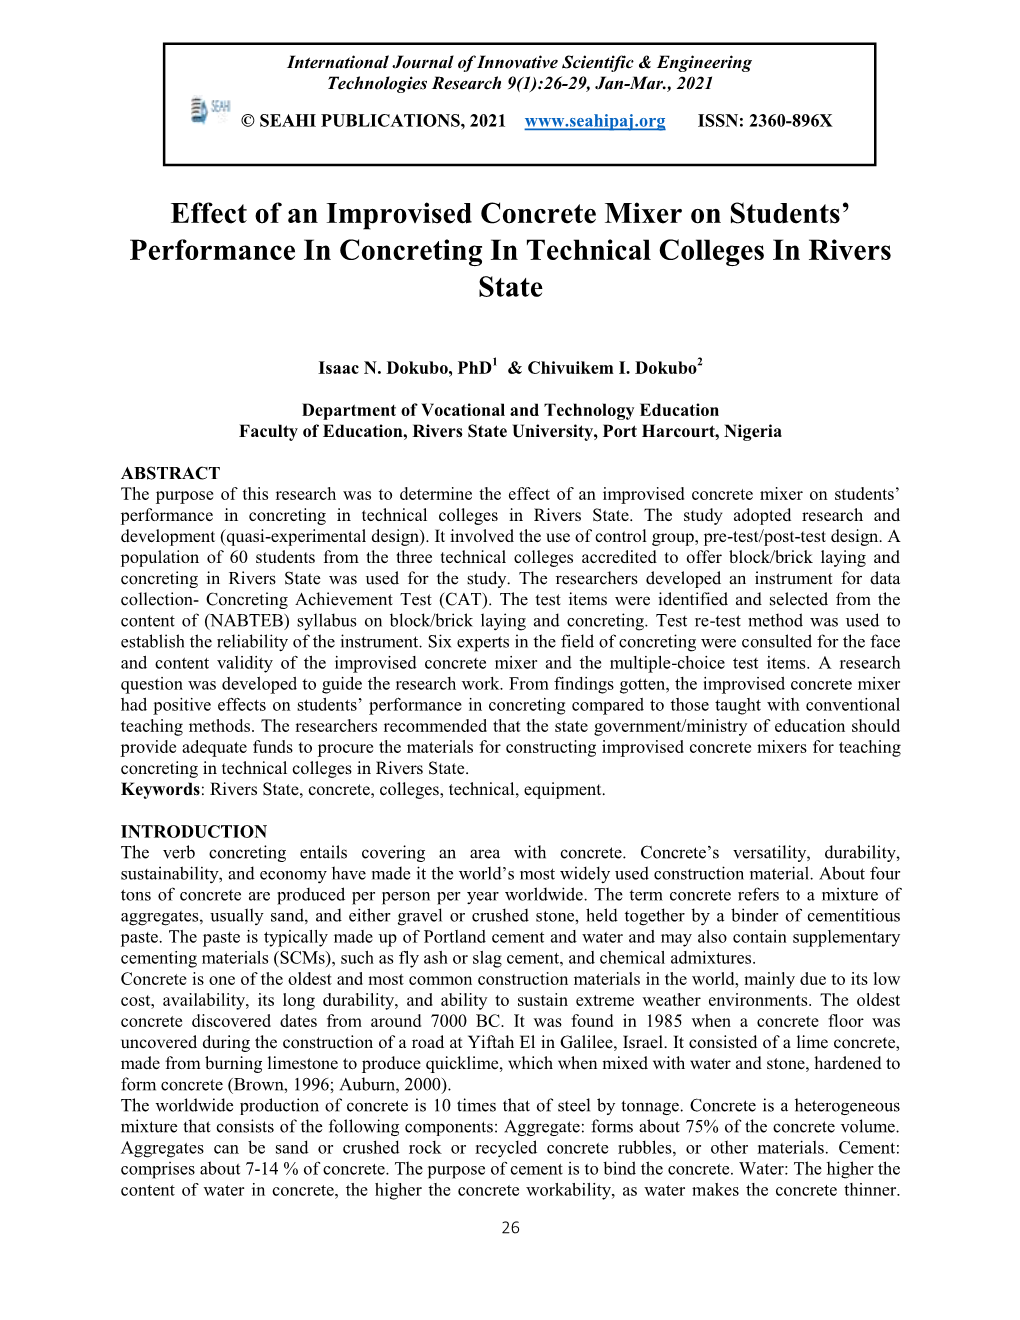 Effect of an Improvised Concrete Mixer on Students' Performance in Concreting in Technical Colleges in Rivers State